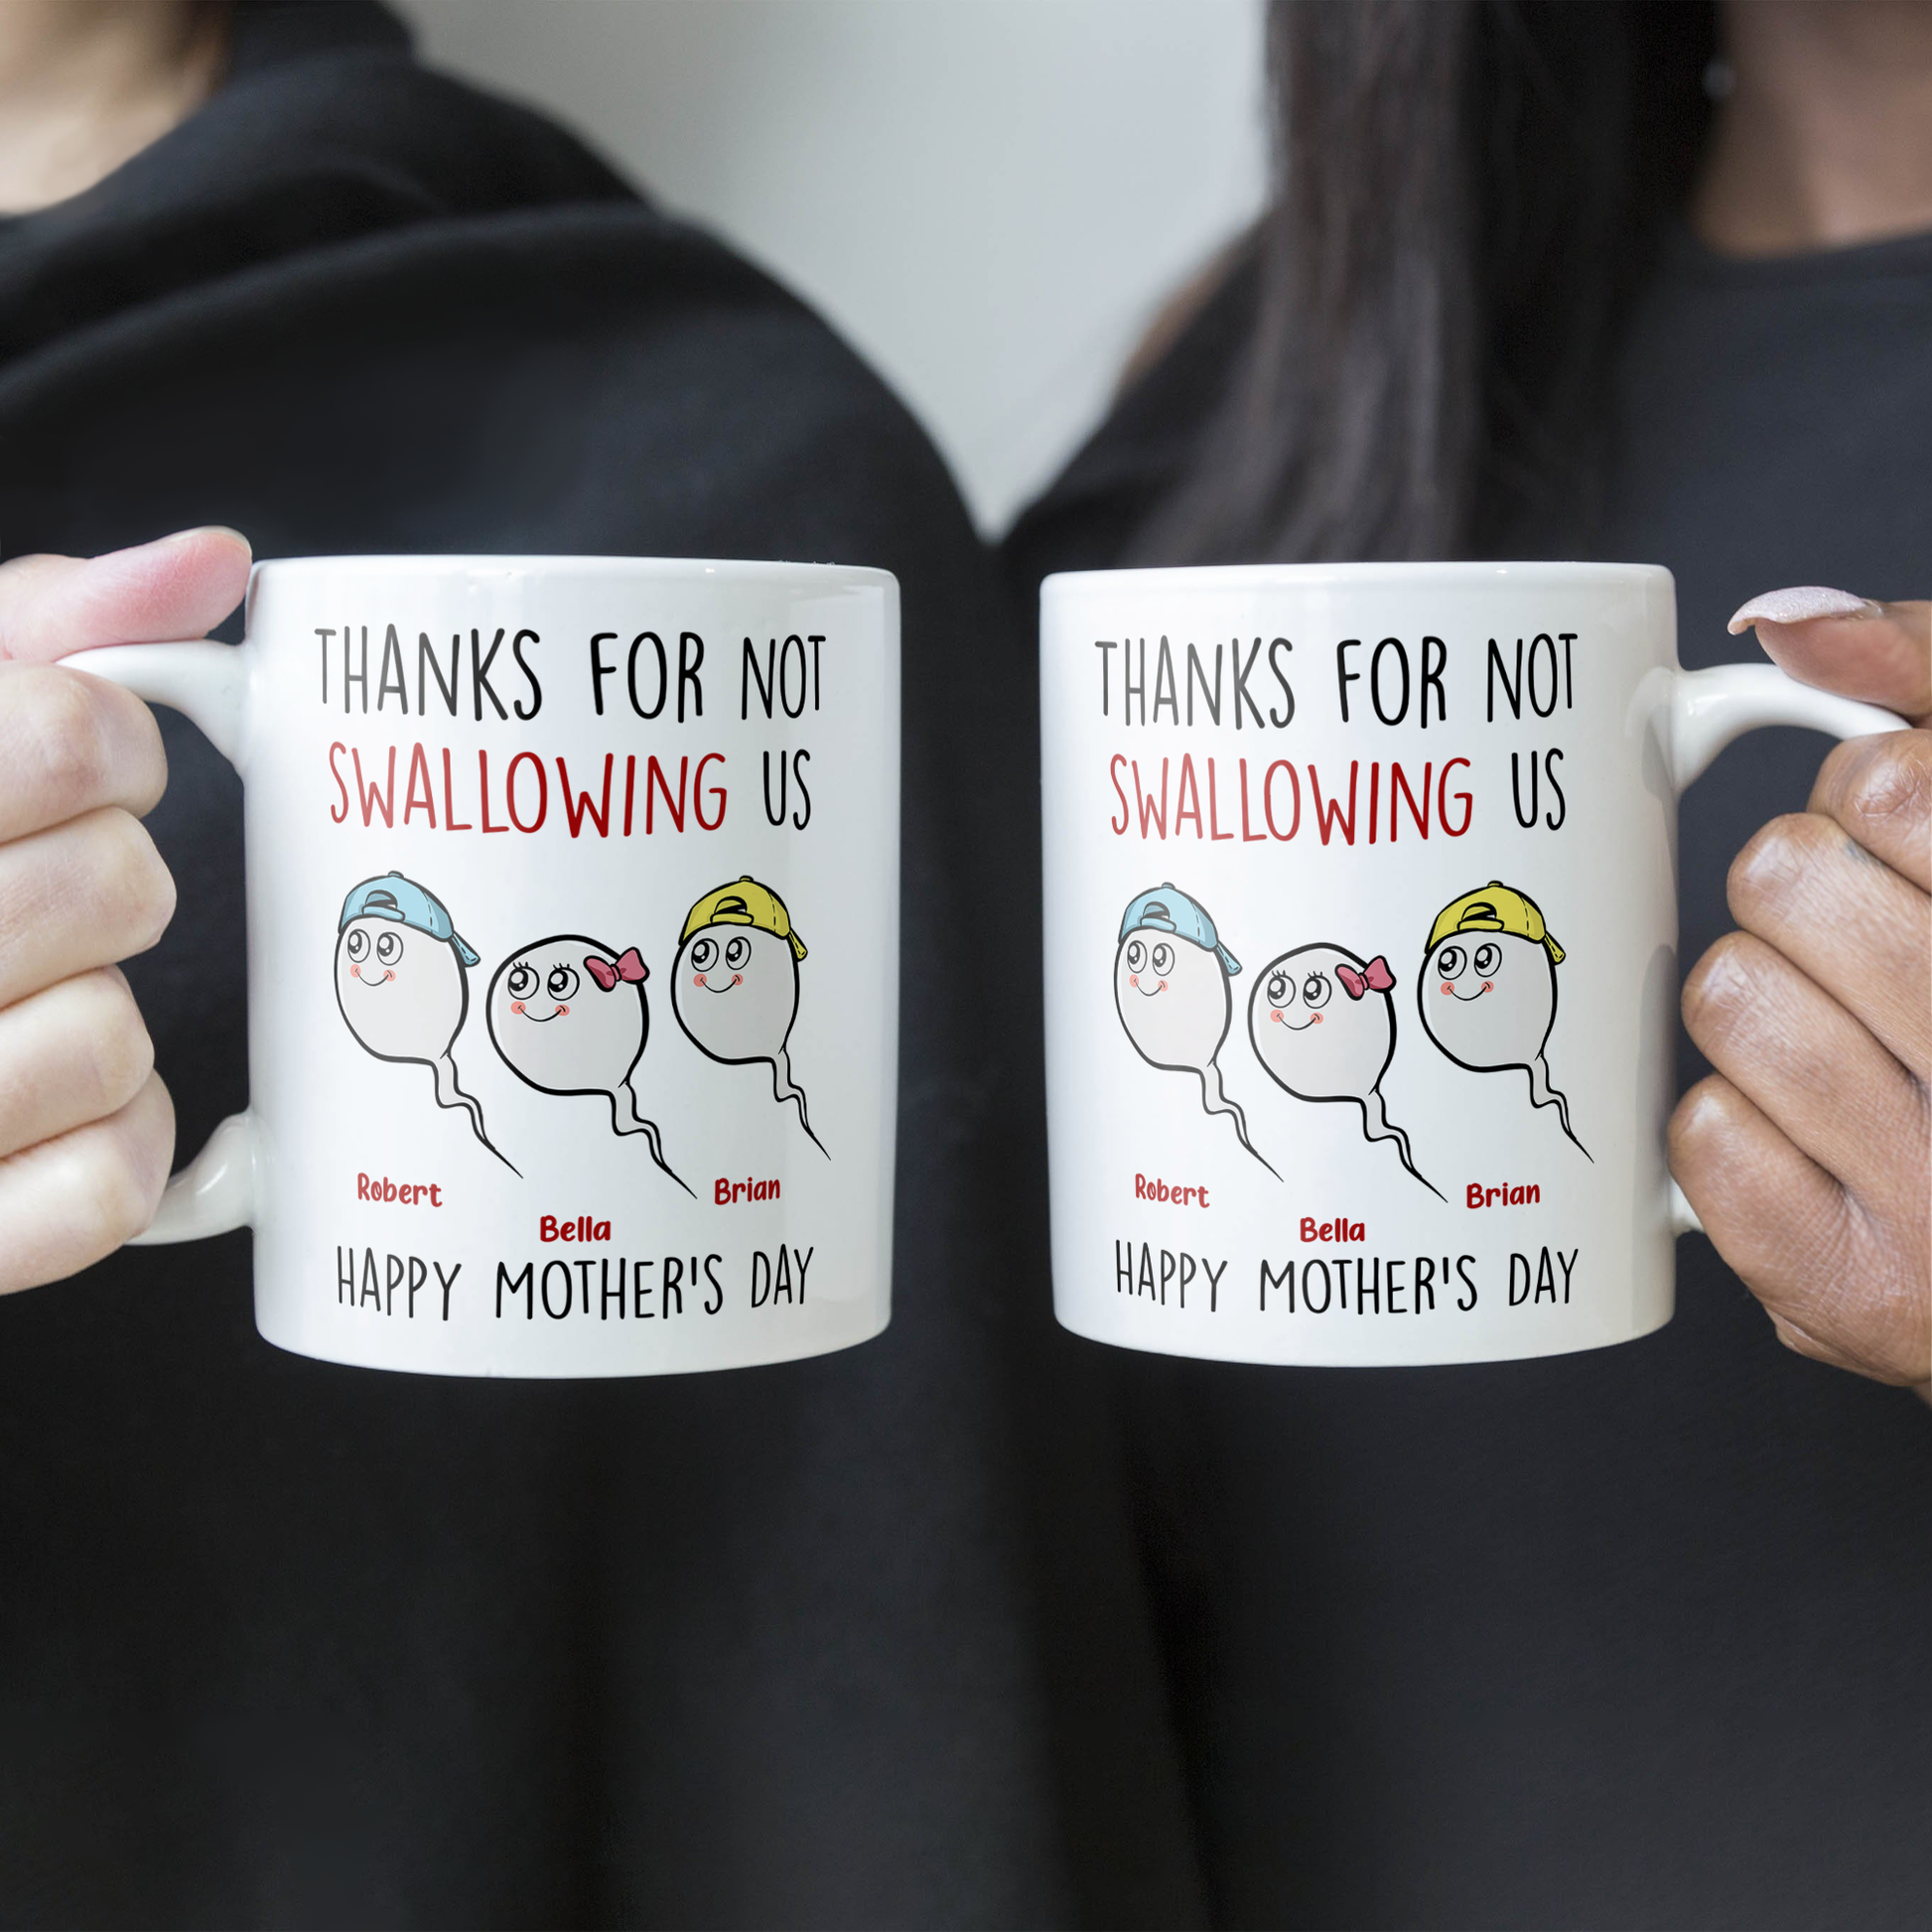 Funny Gifts For Mom Mom And Daughter Gifts Thank You For Not Swallowin  Coffee Mug. By Artistshot